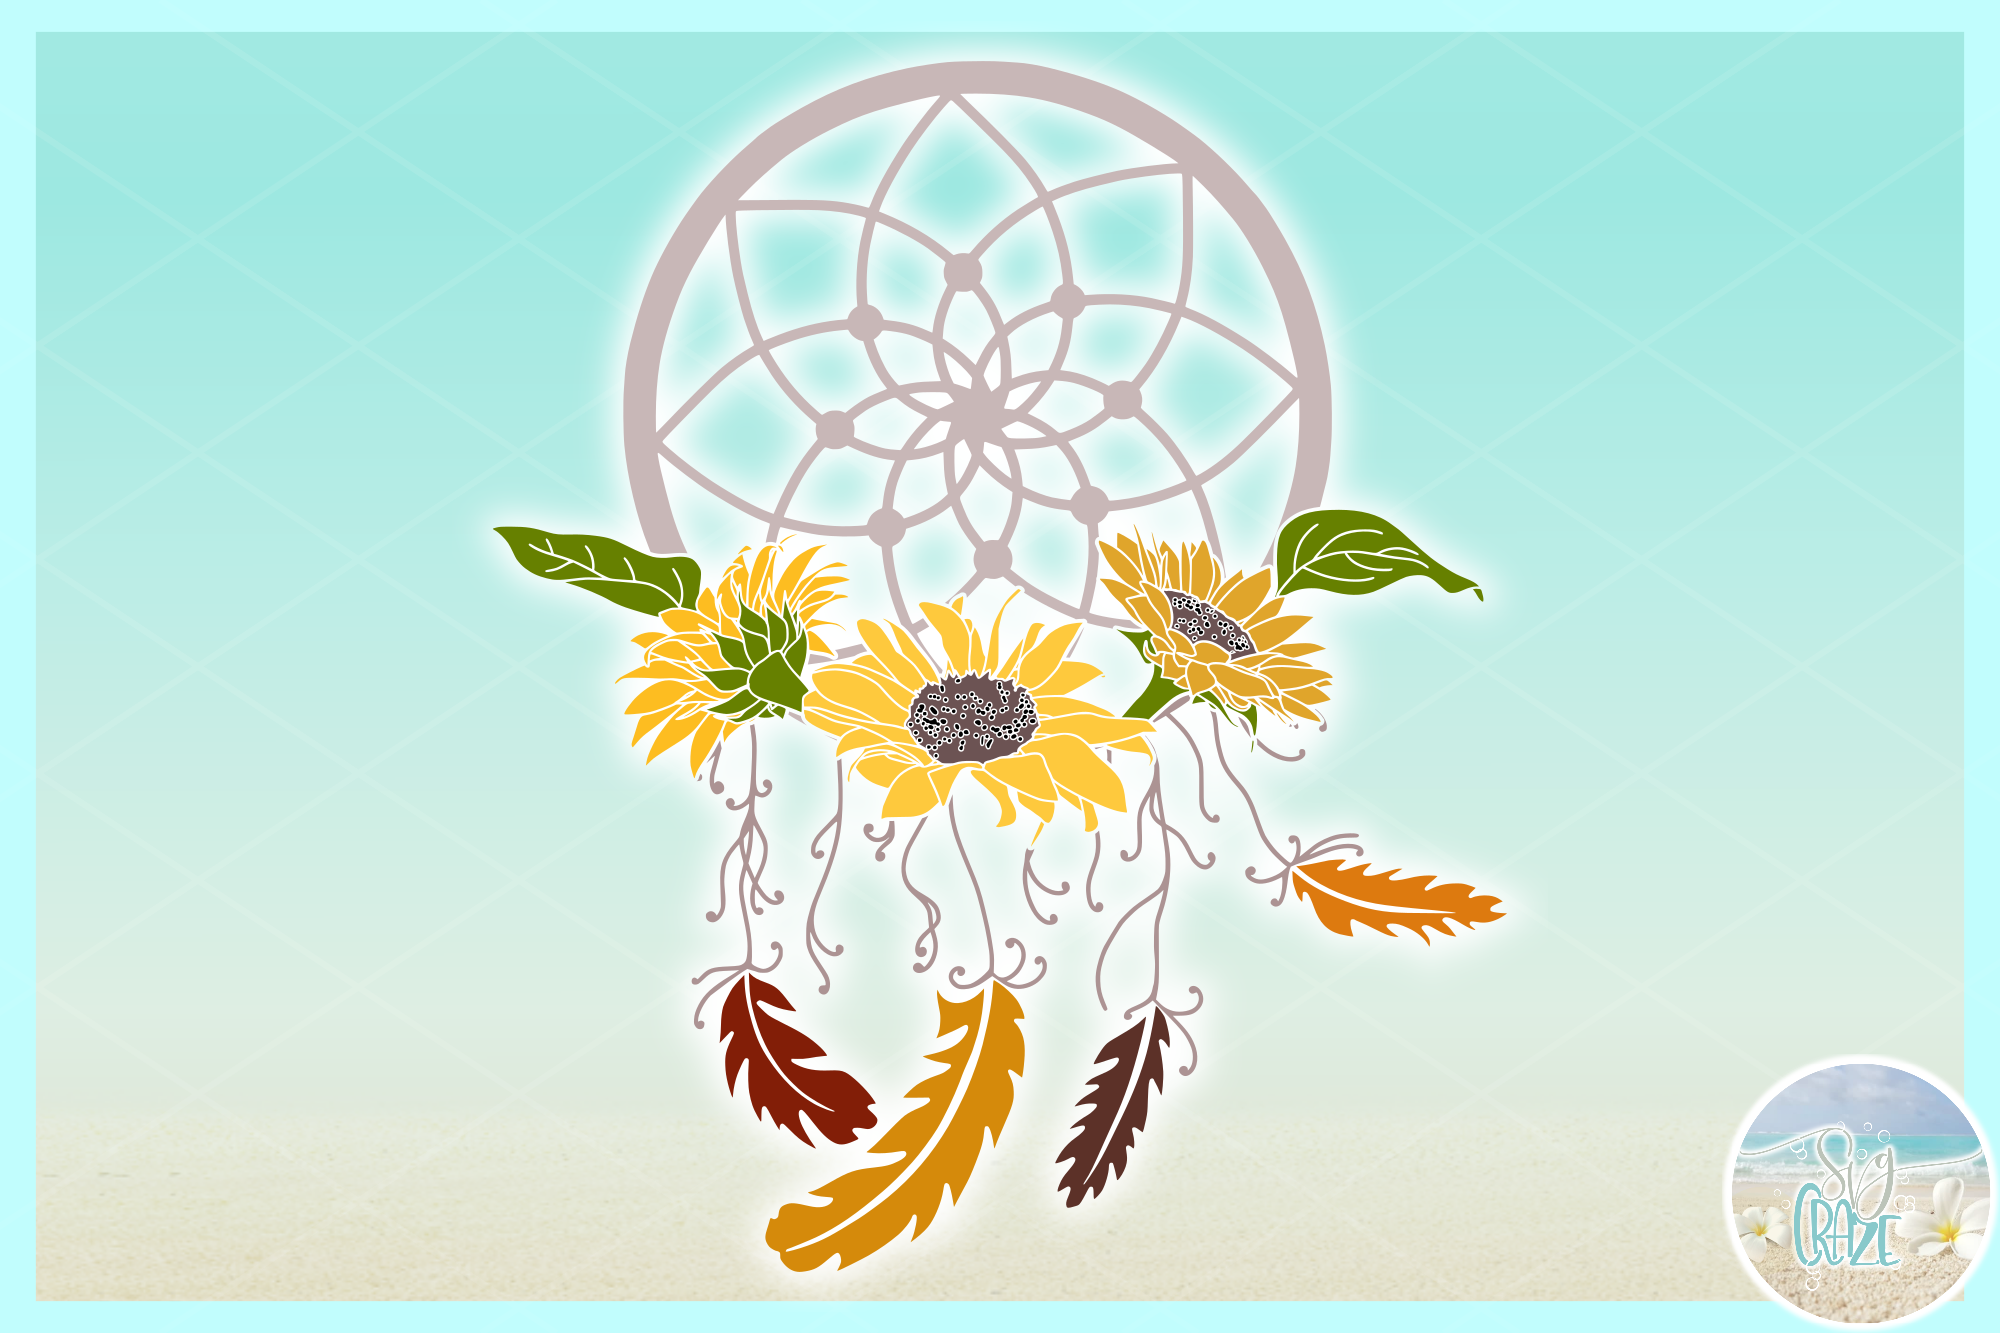 Download Dreamcatcher with Sunflowers Feathers Beads SVG Dxf Eps ...